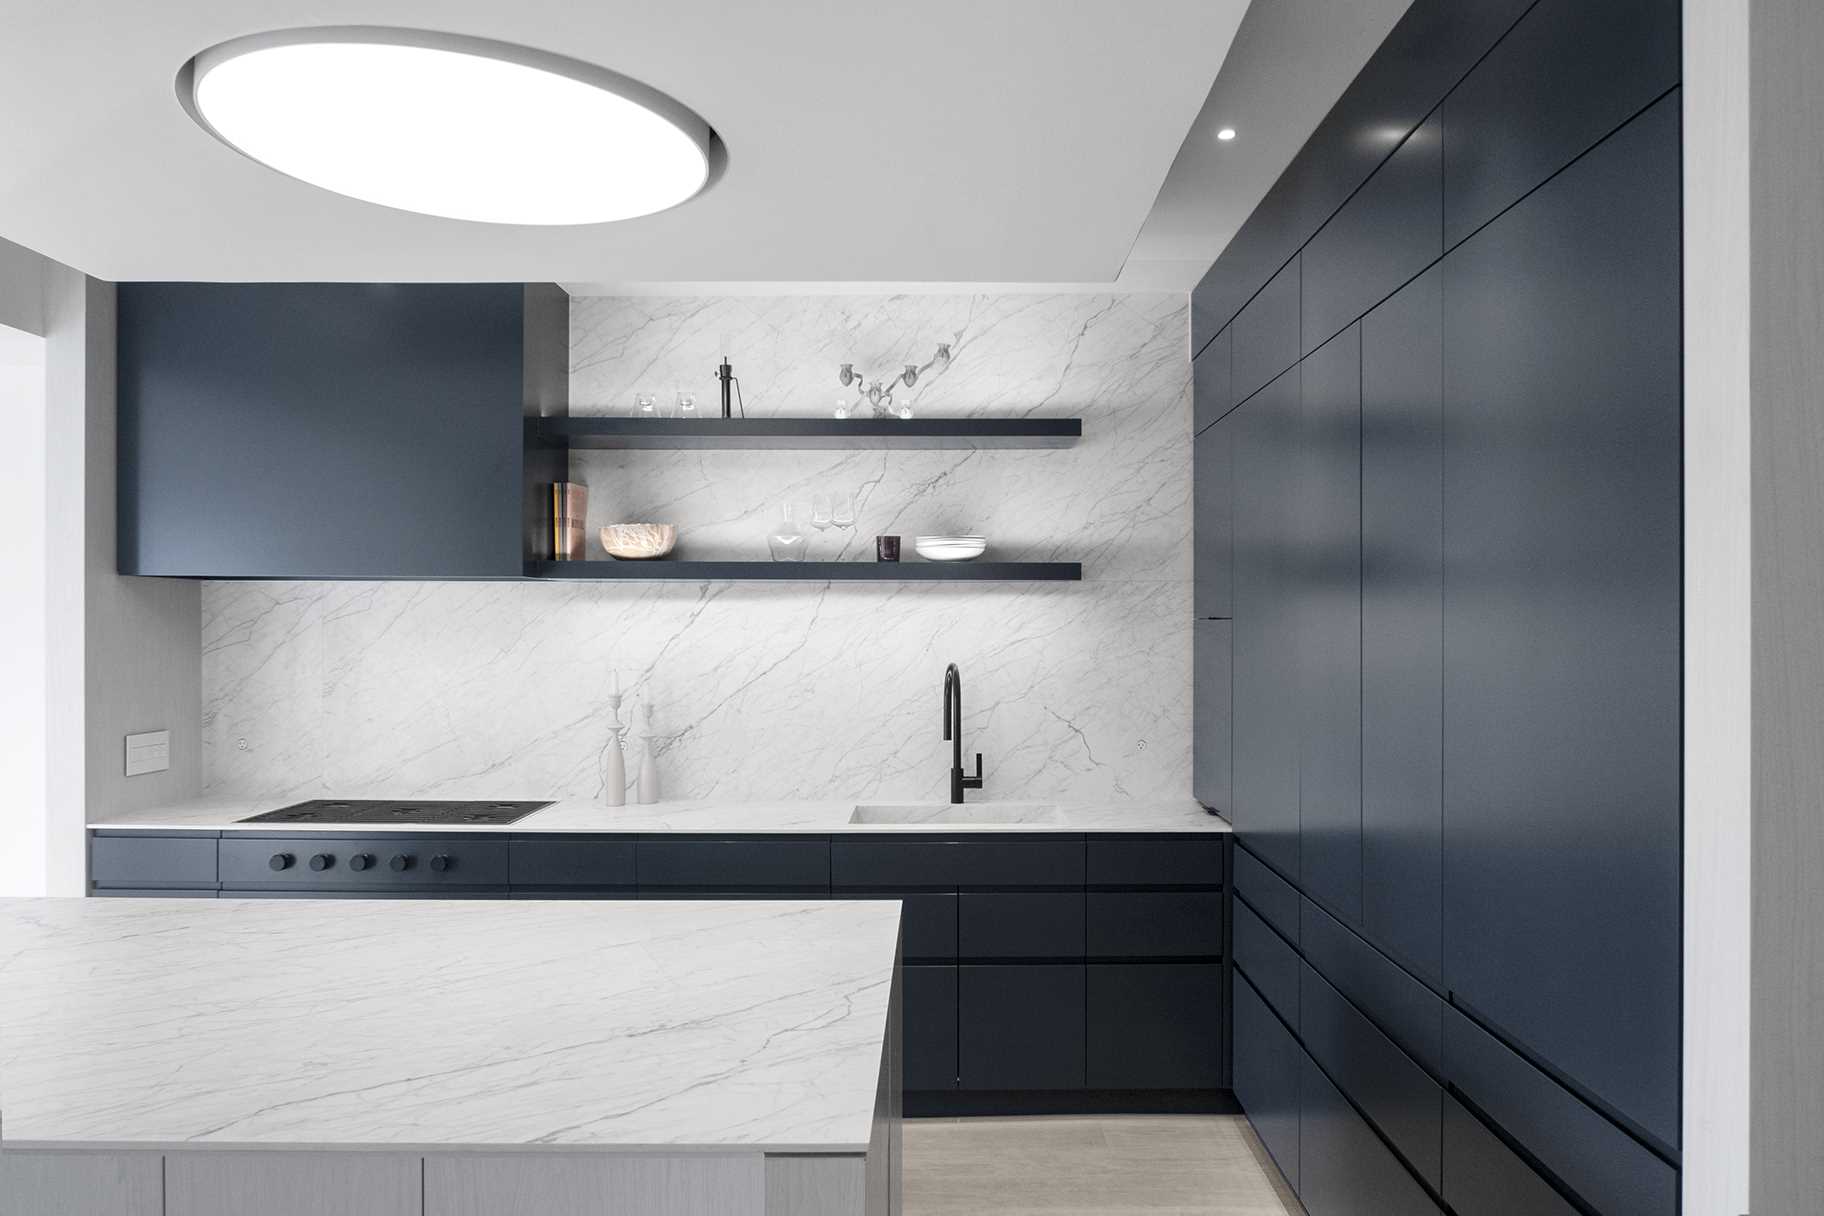 This modern kitchen includes minimalist dark cabinets, open shelving, light countertops, and an island.